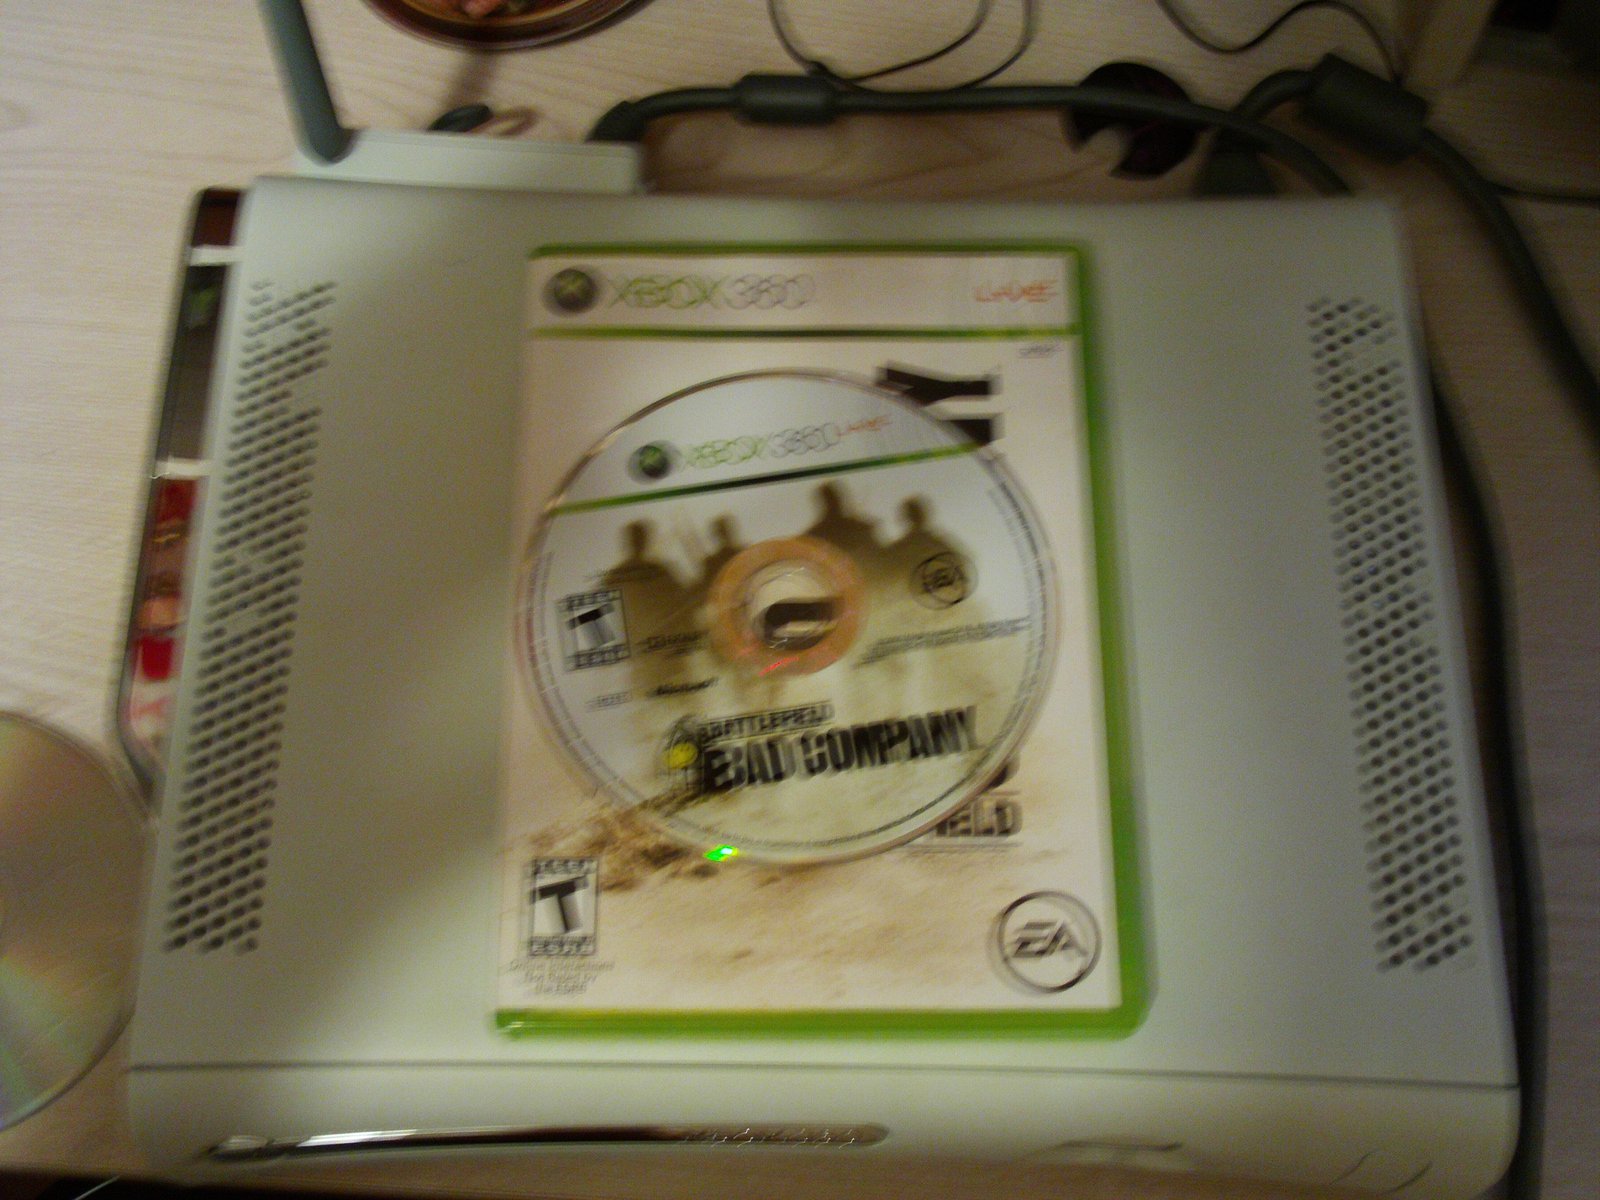 Xbox for sale